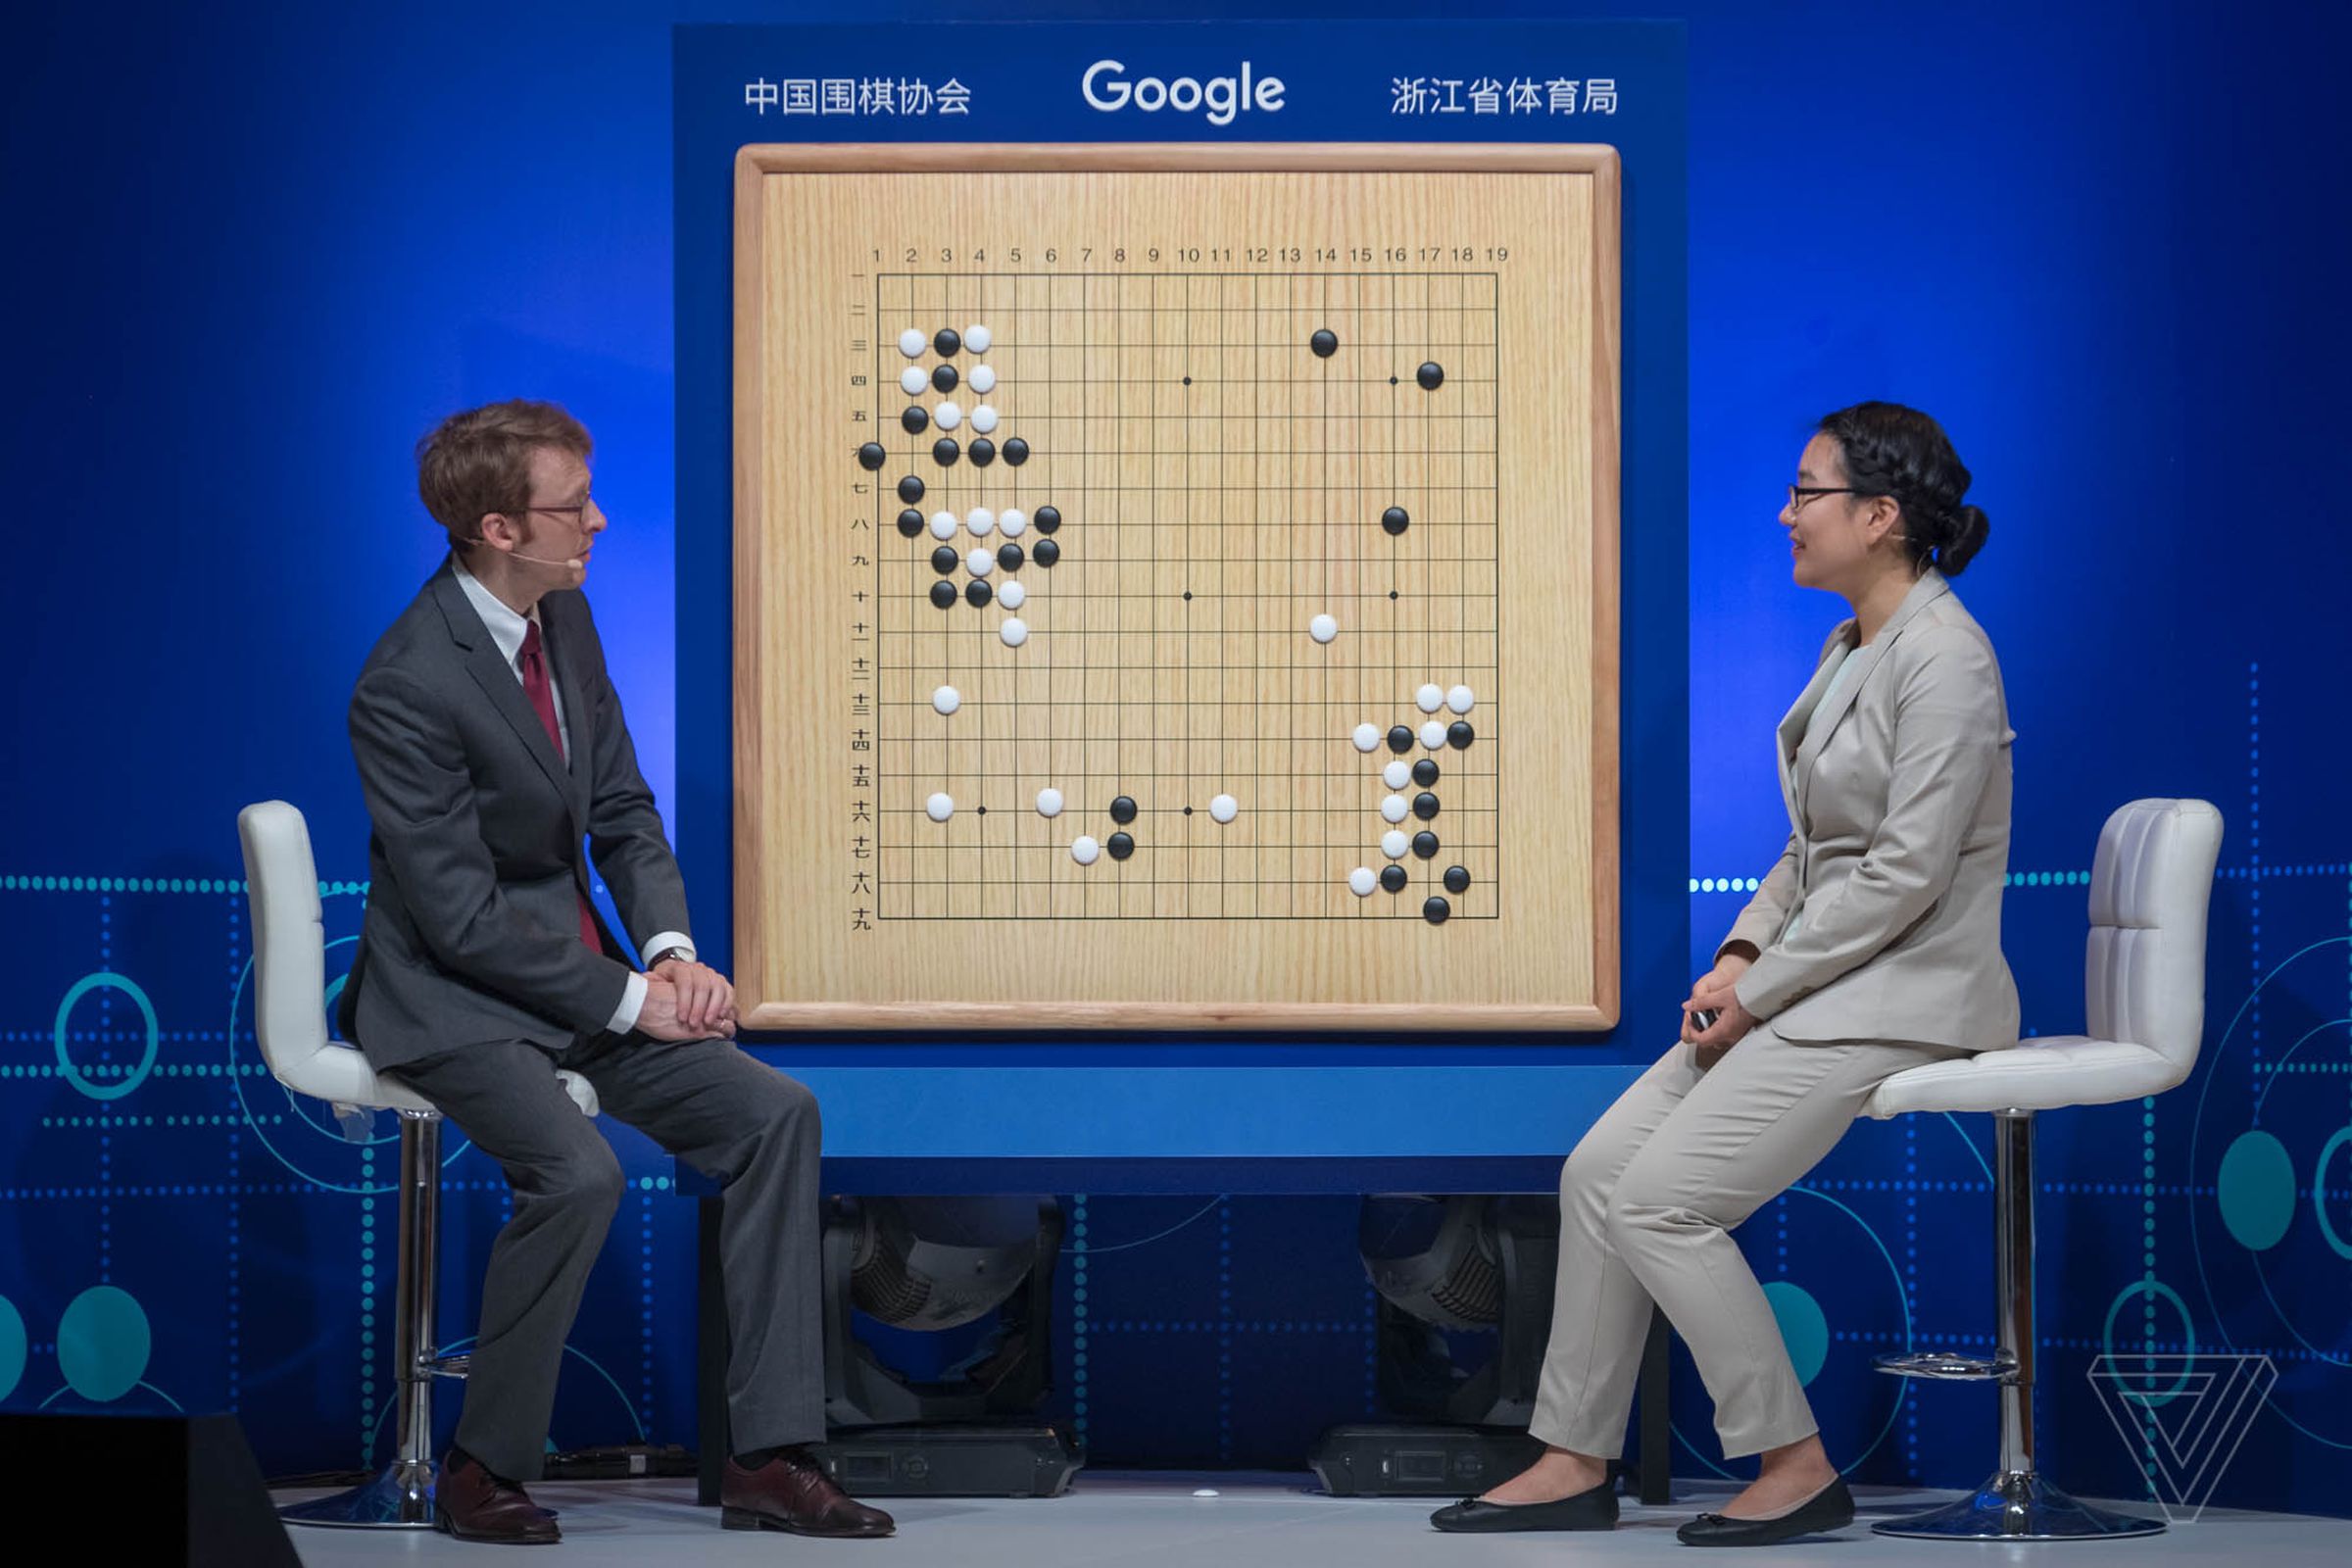 Andrew Jackson and Lee Ha-jin discuss AlphaGo's first game against Ke Jie.